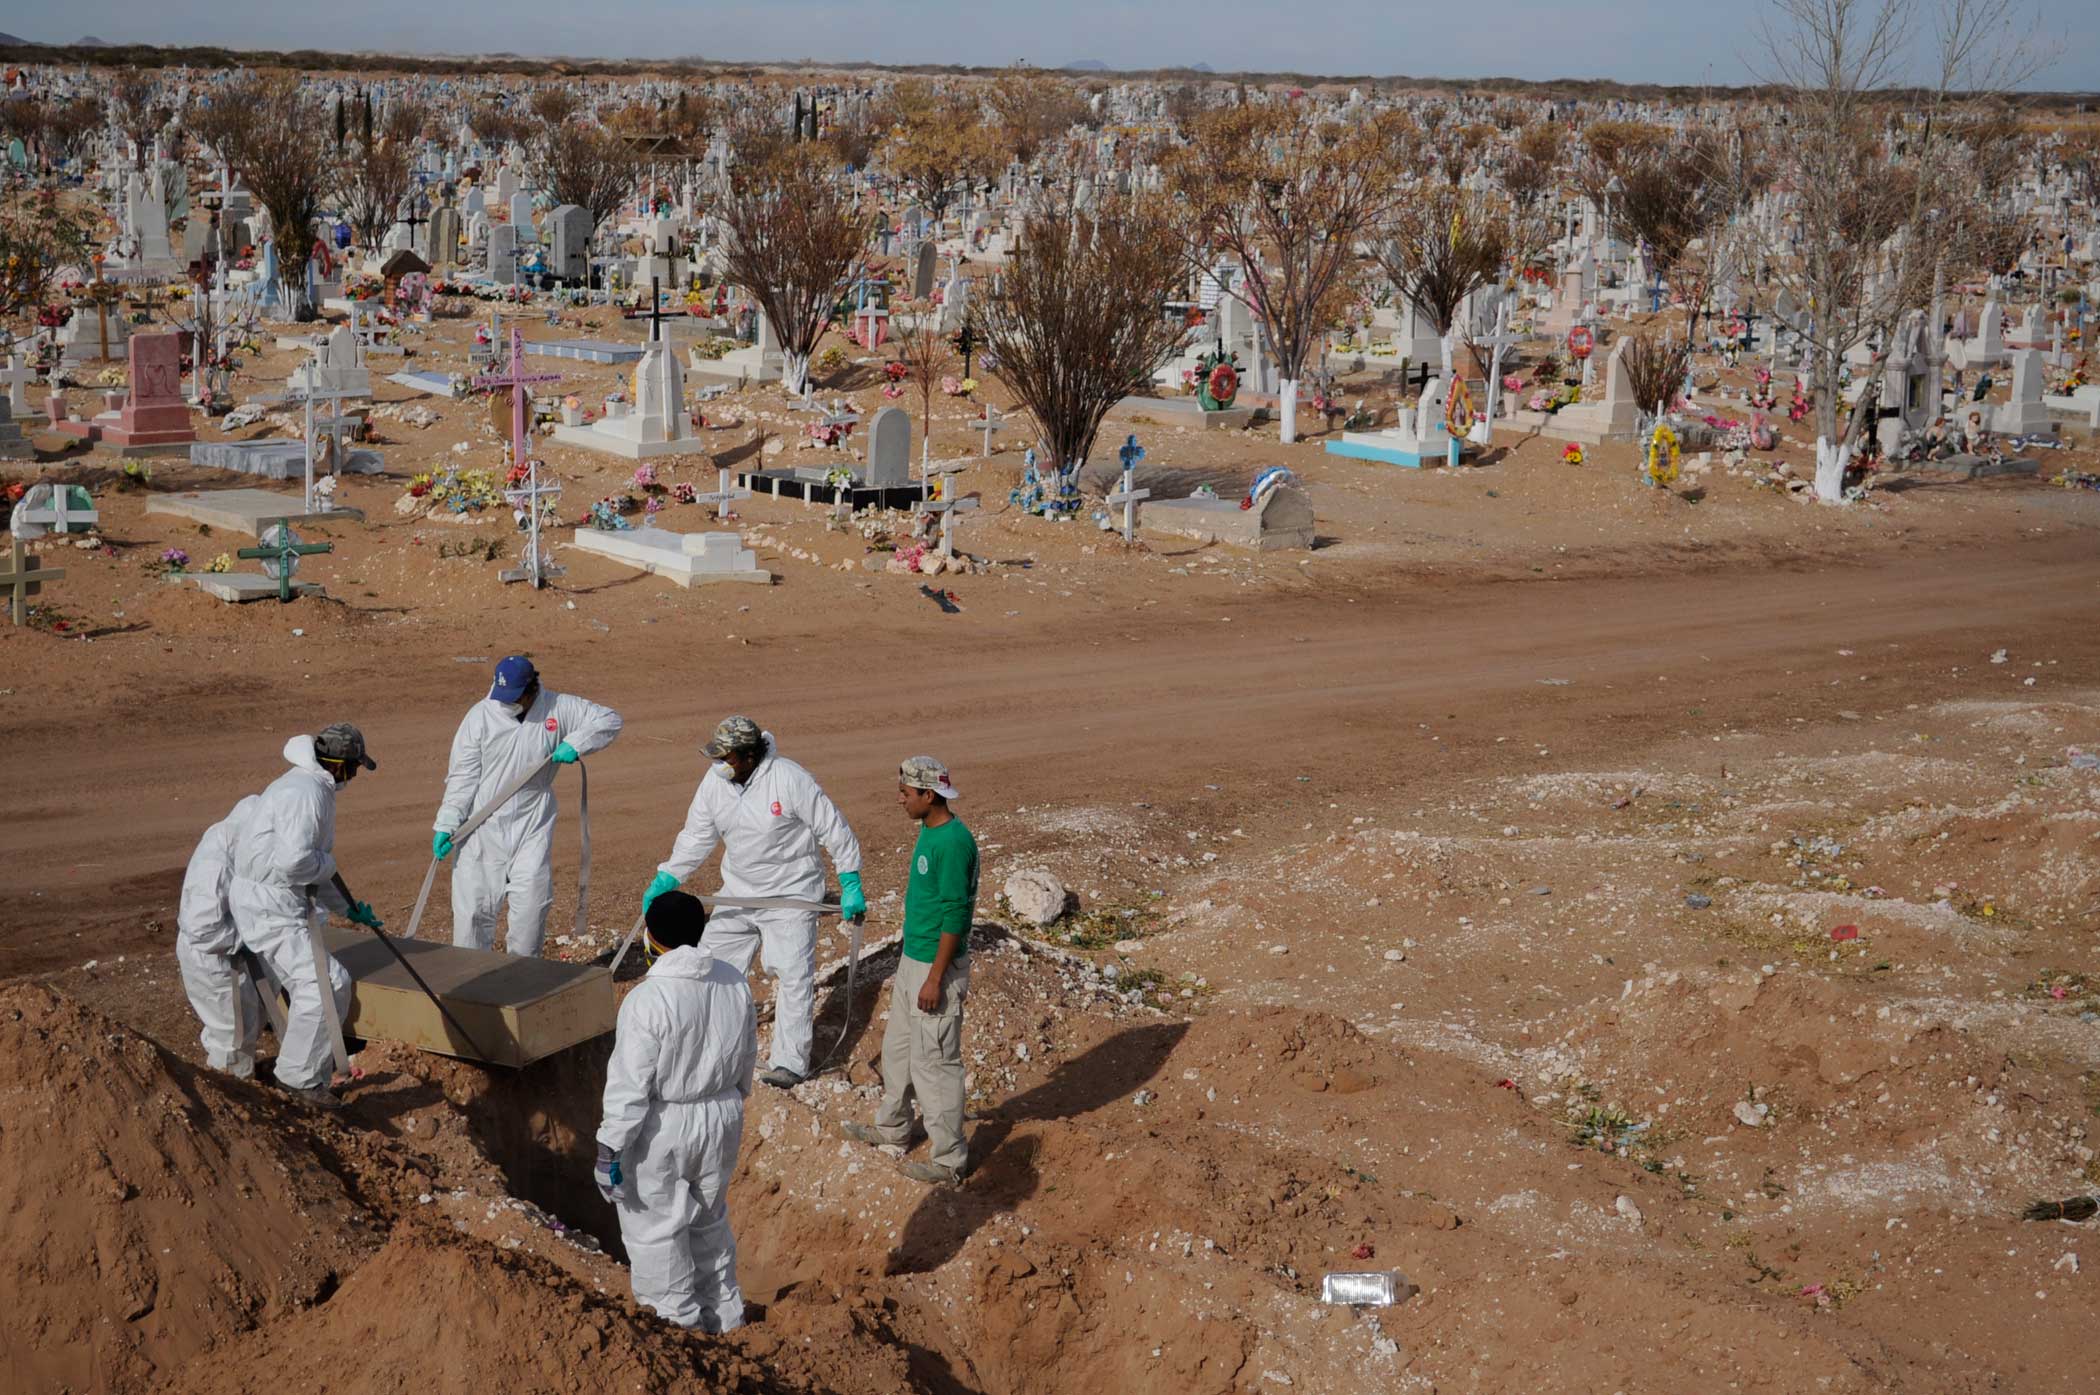 A forensics team buries an unidentified bodies in a mass grave.